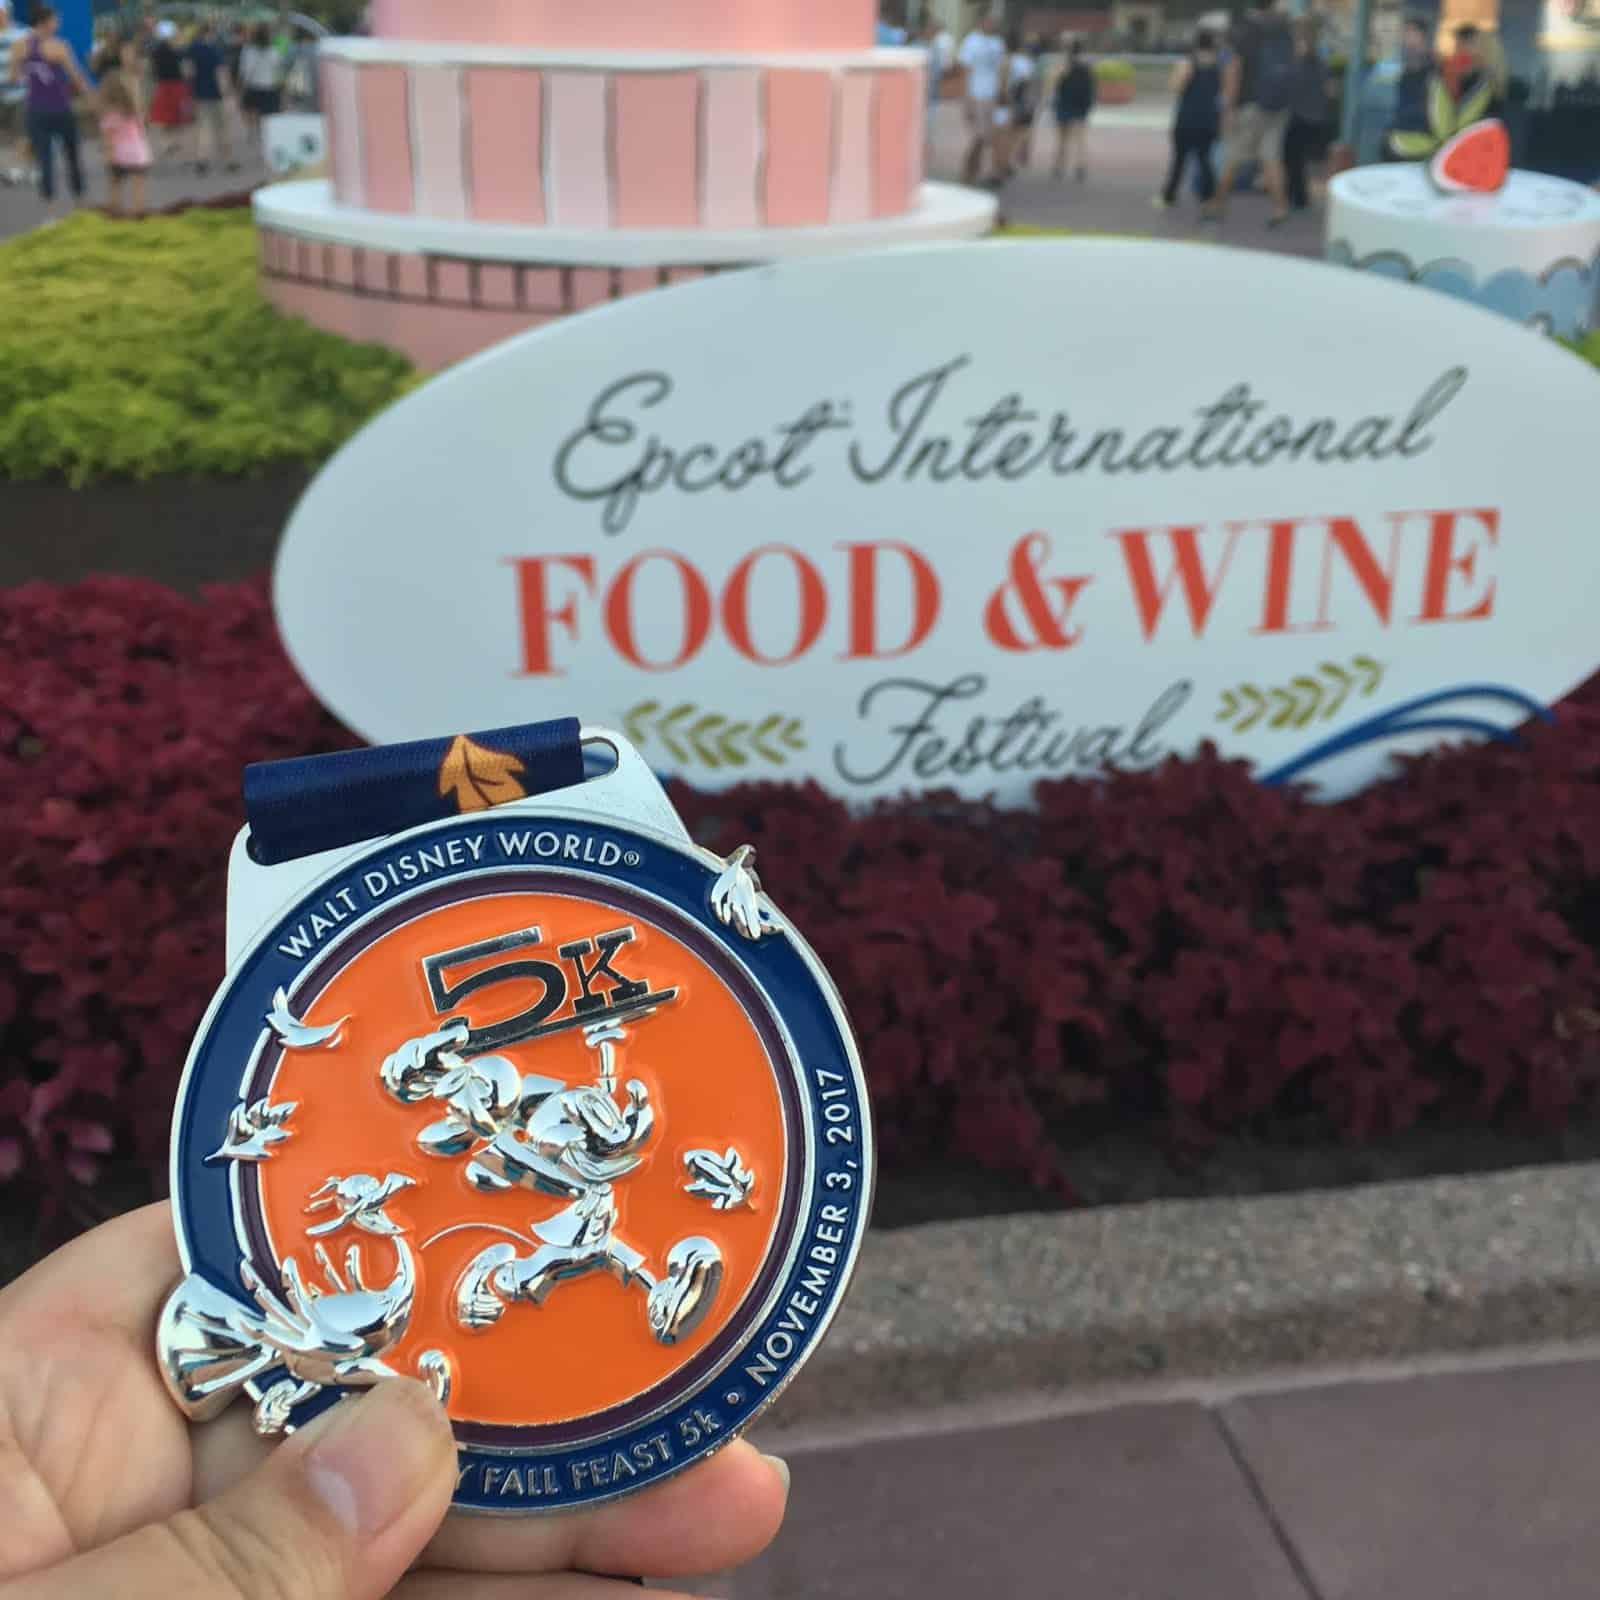 Fall Feast 5K medal in front of festival sign